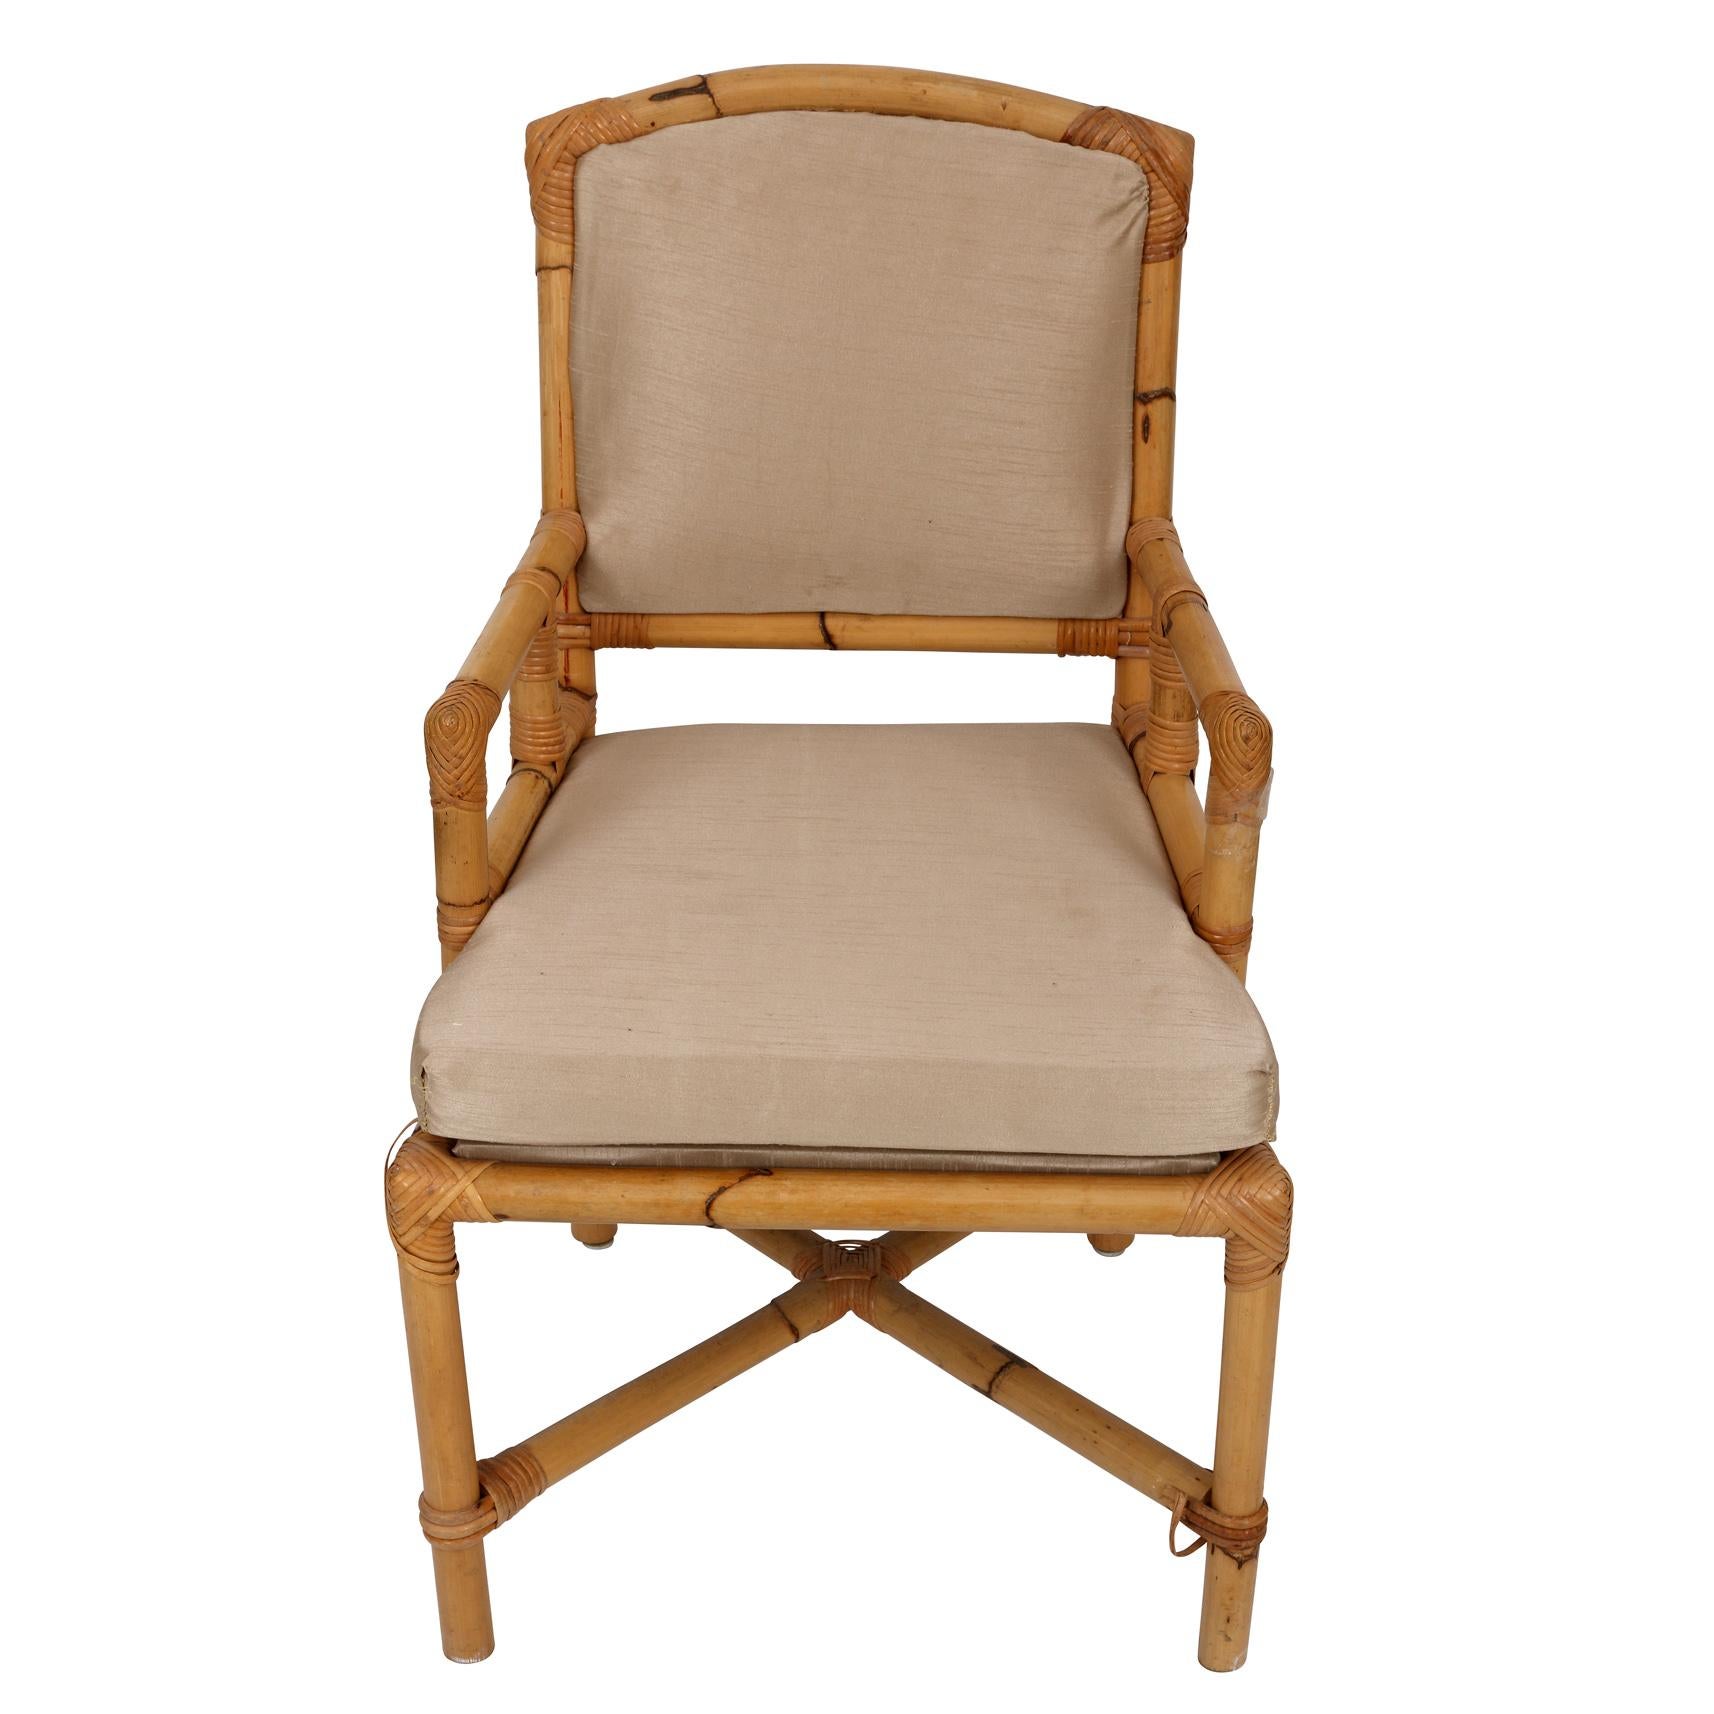 A perfect single bamboo and rattan wrapped armchair with newly upholstered beige raw silk cushion and back. A perfect desk chair for your office or reading chair in the guest room, the possibilities are endless with this super chic piece!